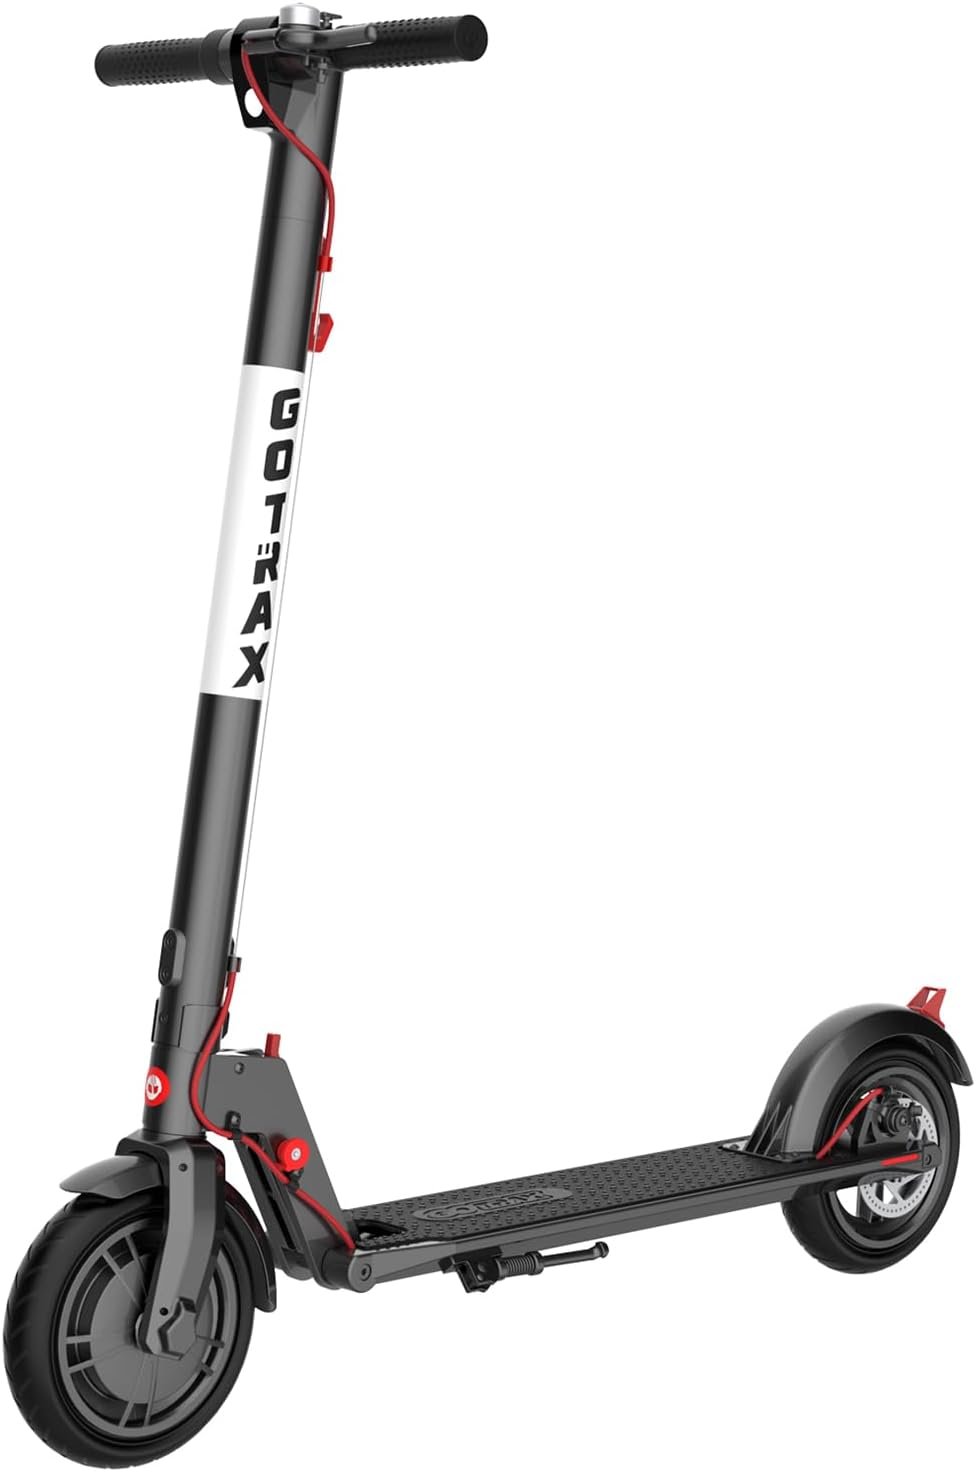 Gotrax GXL V2 Series Electric Scooter, 8.5 Pneumatic Tire, Max 12/16mile Range, 15.5mph Power by 250W/300W Motor, All Aluminum Body, Digital Display and Cruise Control Foldable Escooter for Adult